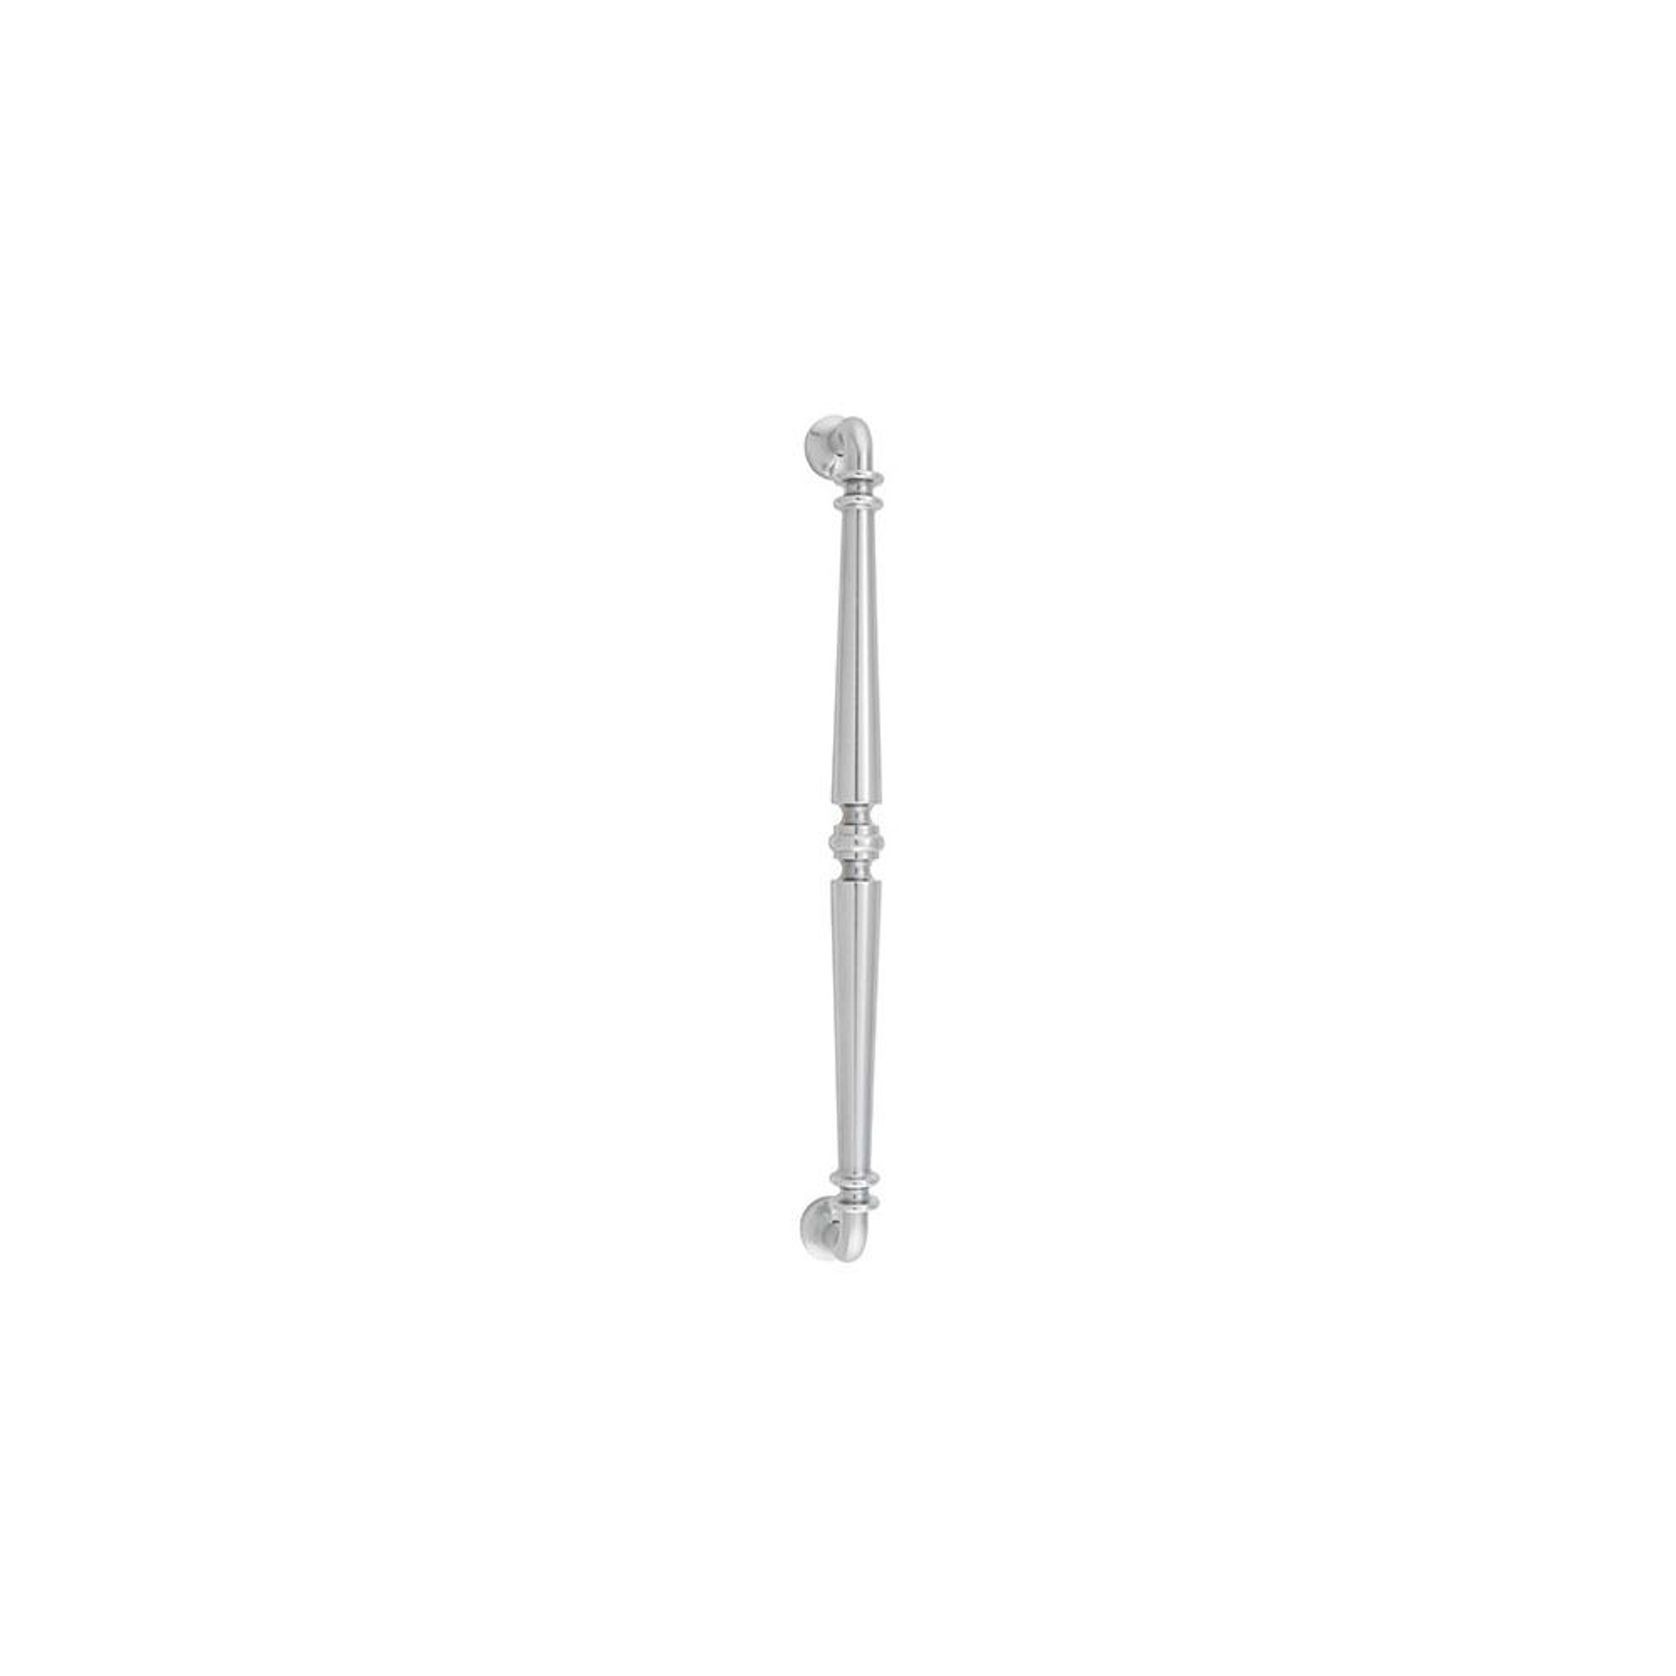 Iver Sarlat Door Pull Handle Brushed Chrome 487mm x 72mm 9385 gallery detail image